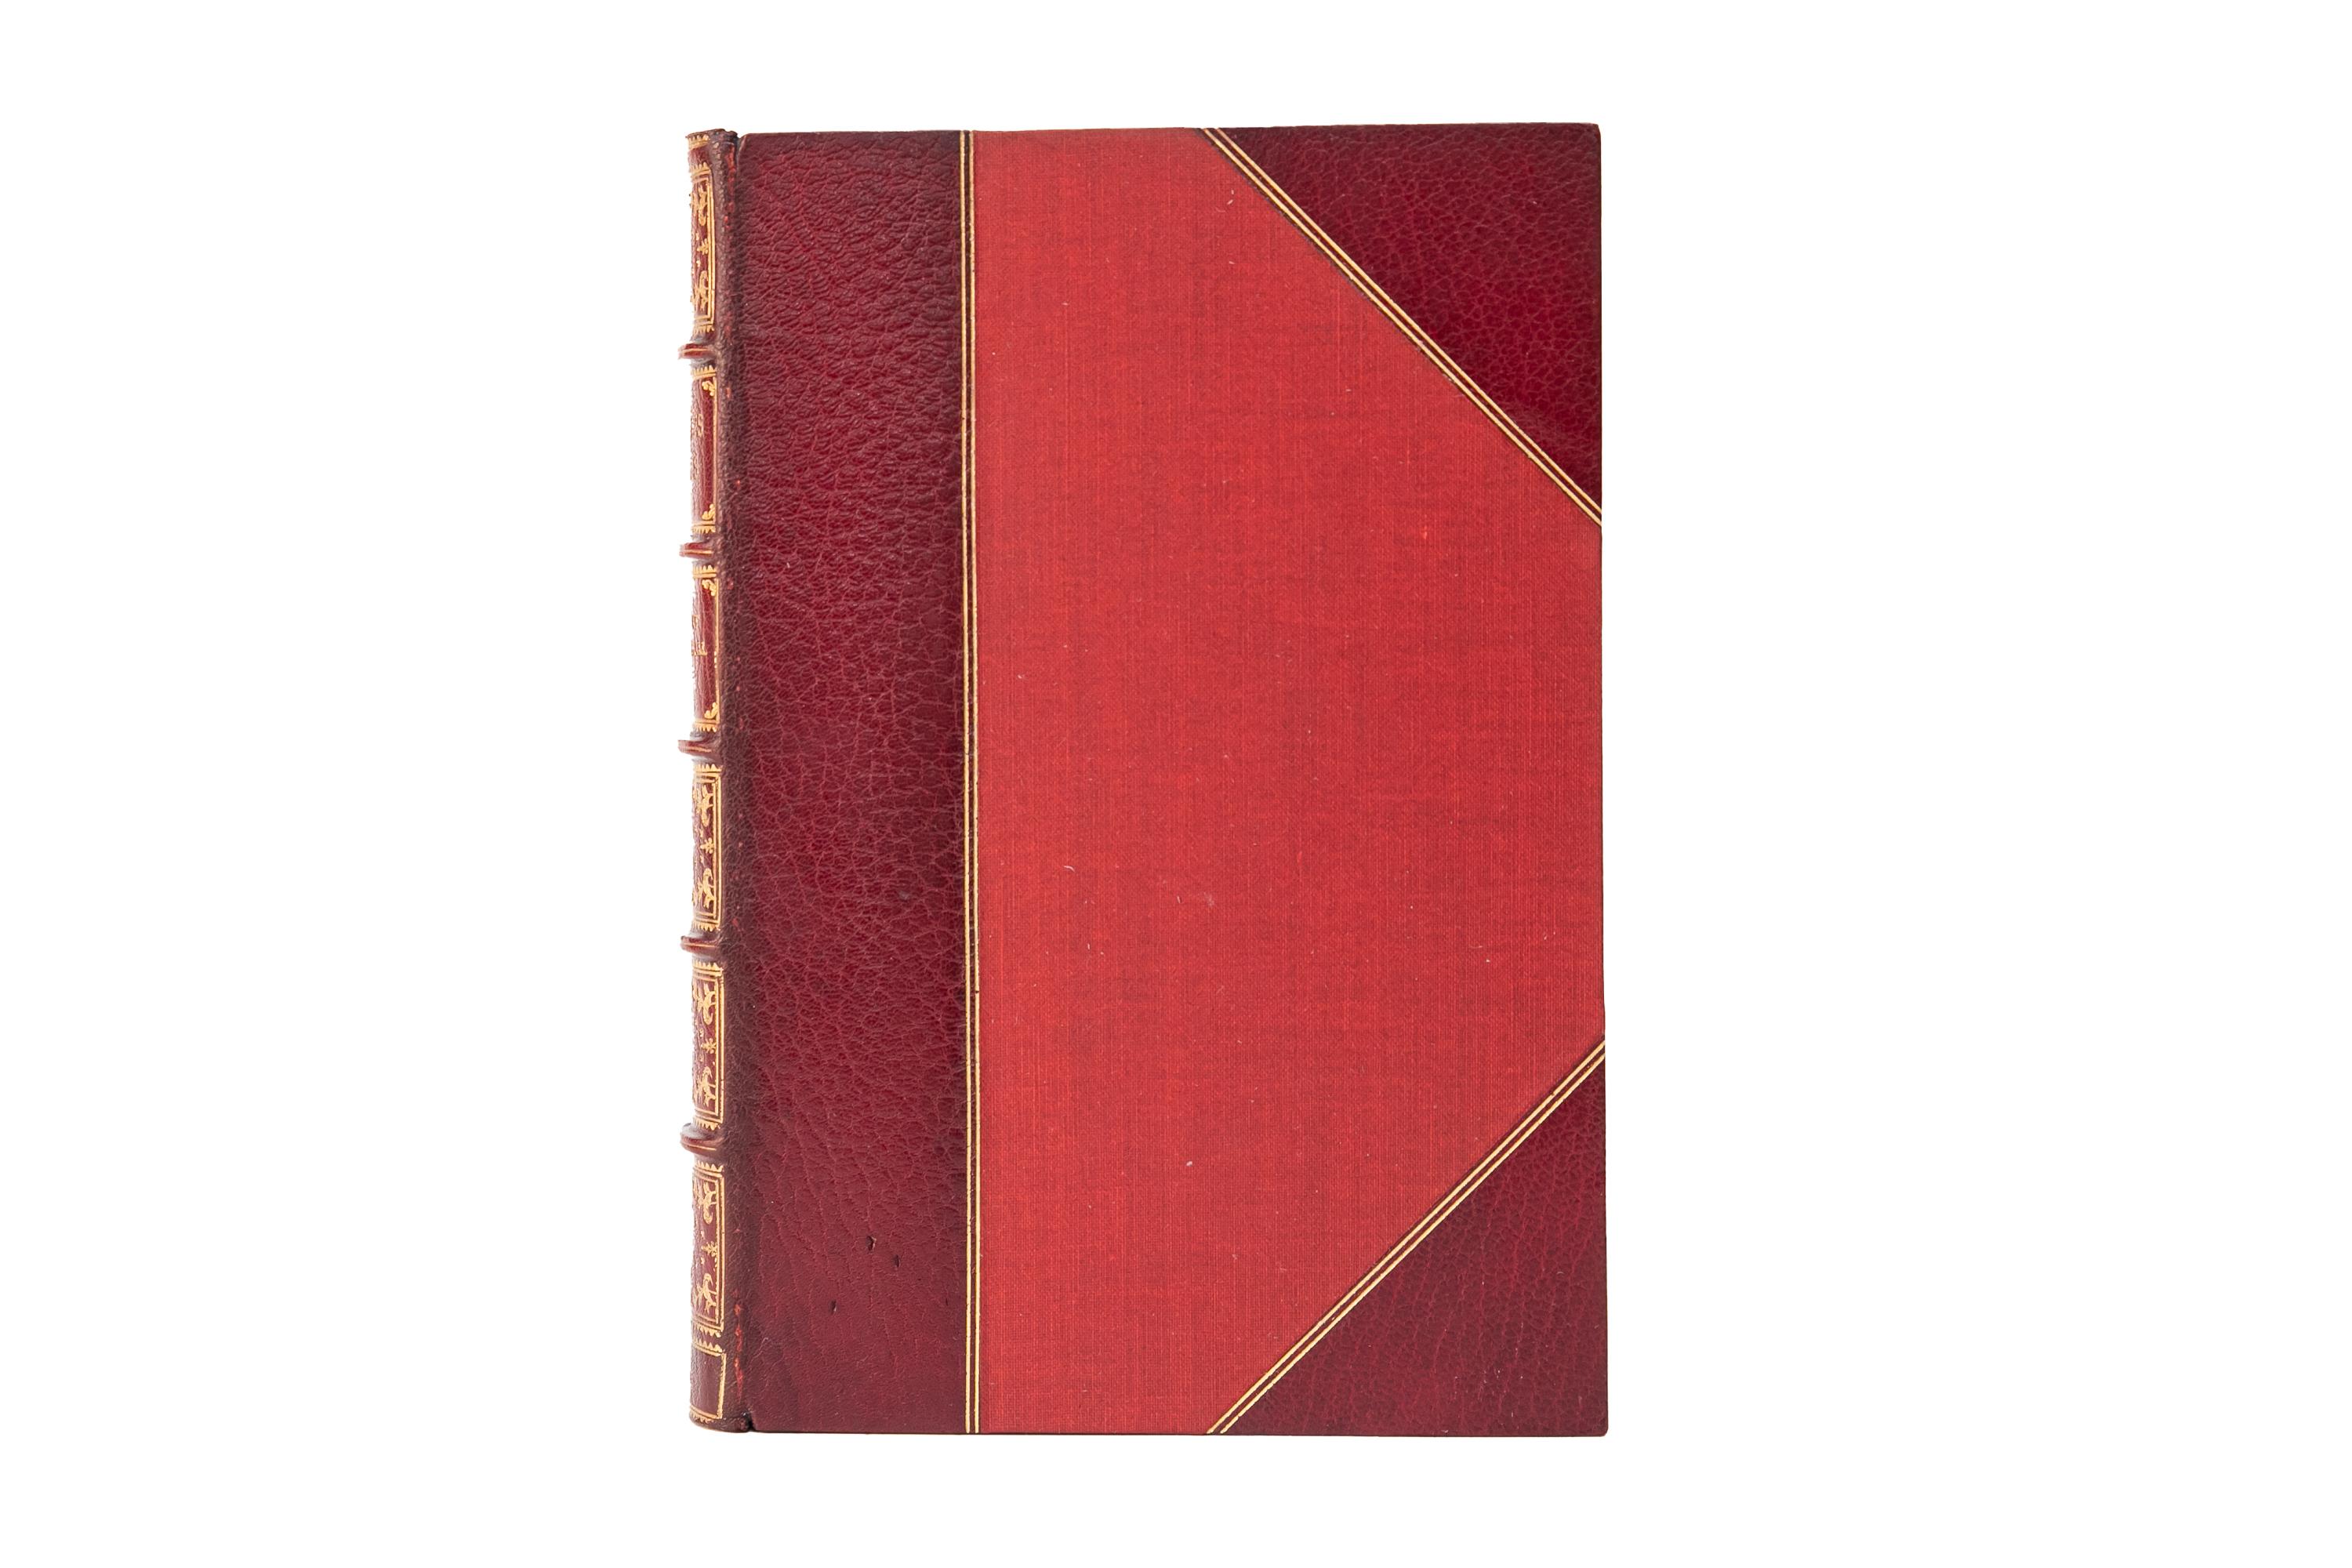 12 Volumes. The Sisters Brontë, The Novels. Thornton Edition. Bound in 3/4 wine morocco and linen boards with gilt-tooled detailing on the covers and raised band spines. Top edges gilt with marbled endpapers. Illustrated throughout. Edited by Temple